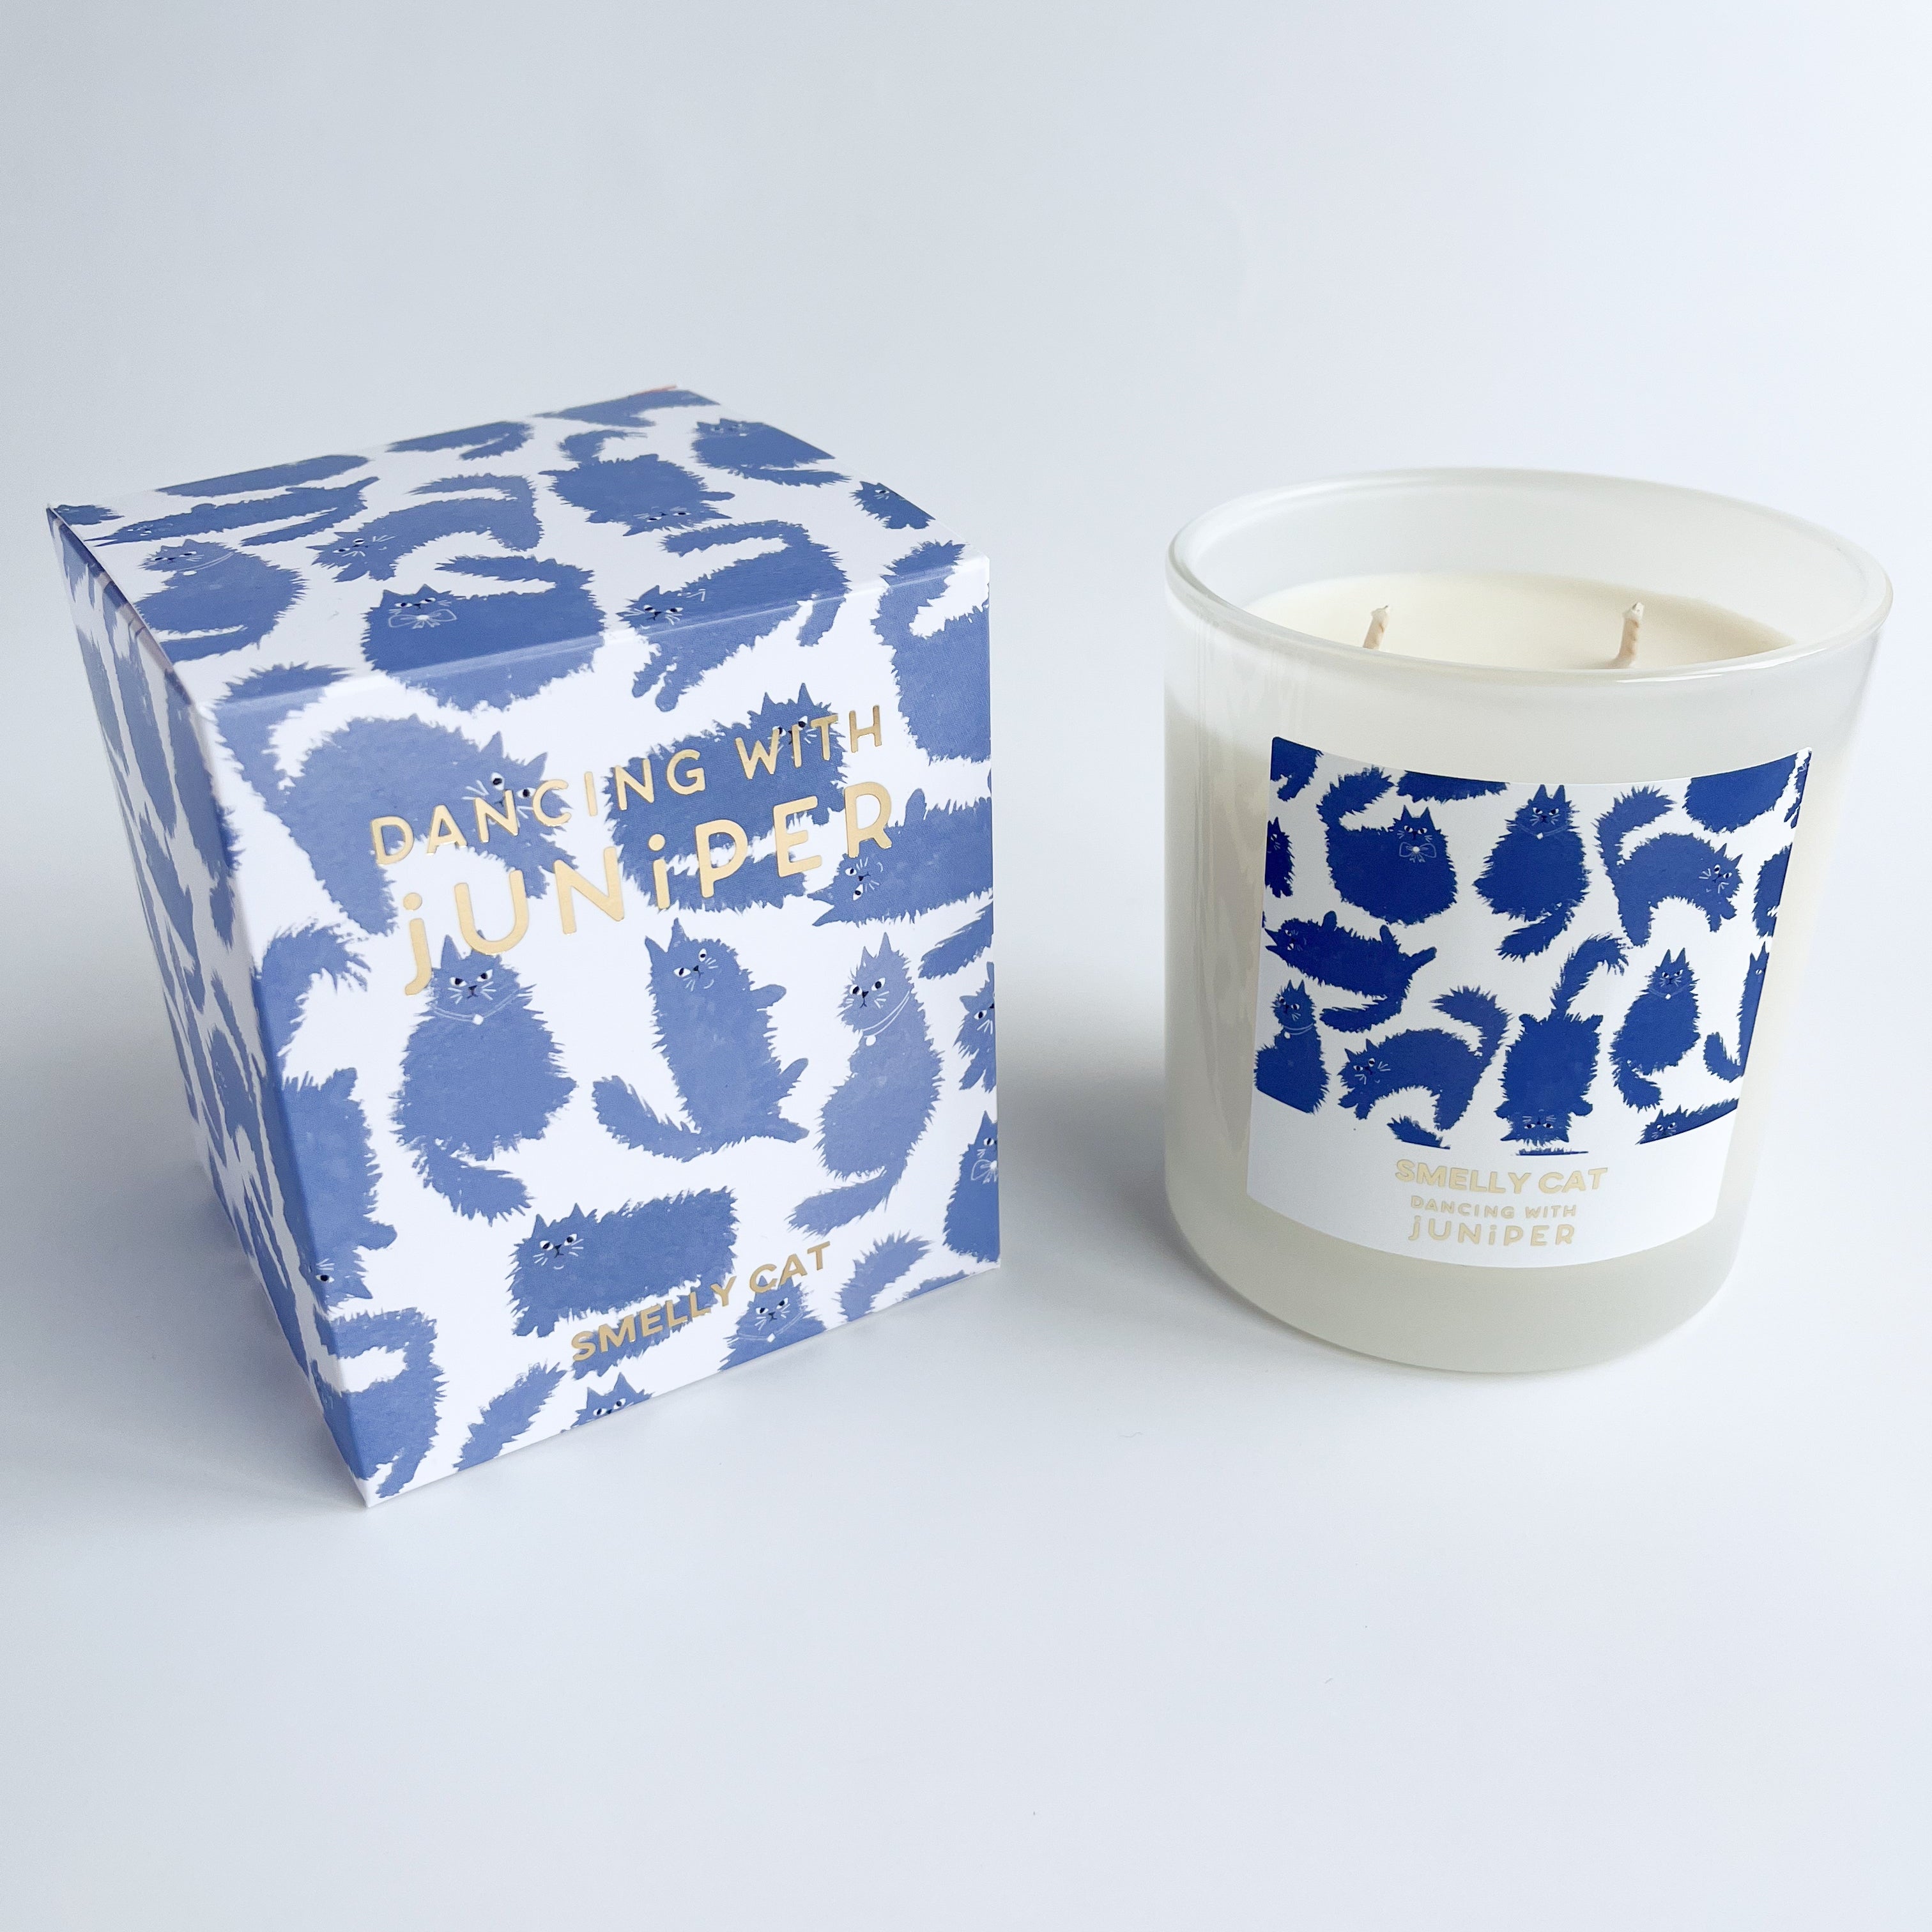 Smelly Cat Soy Candle - candle - Dancing with juniper